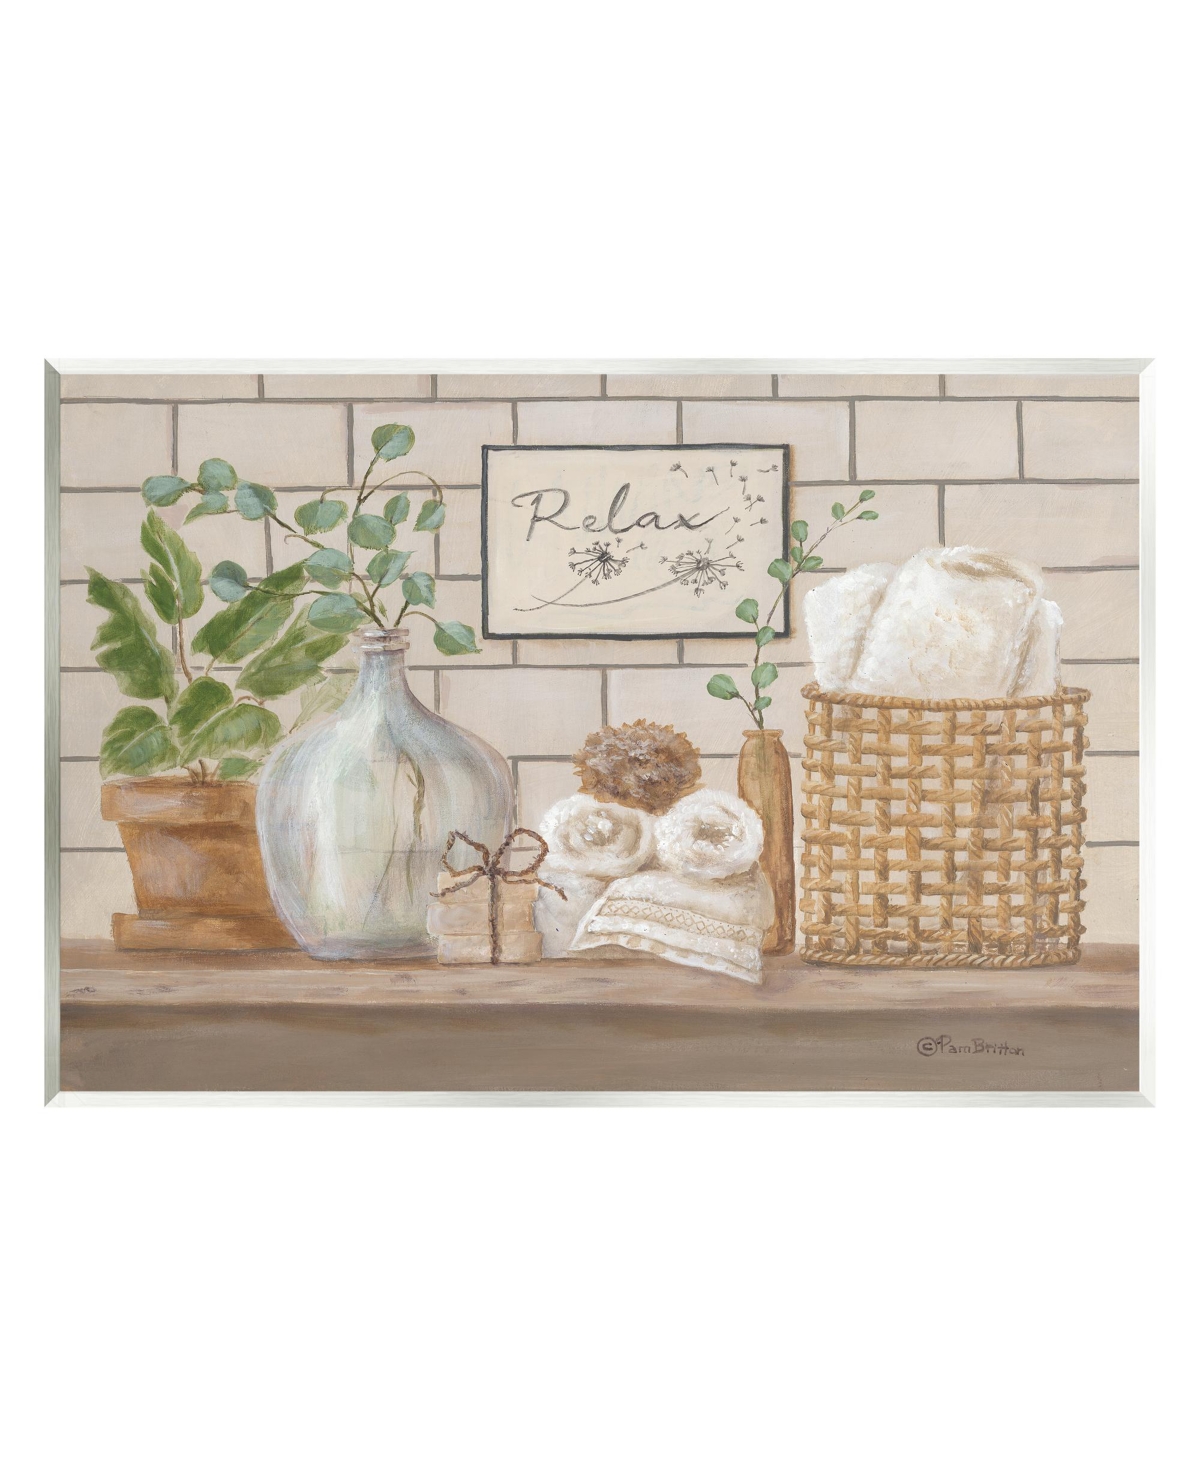 Stupell Industries Relax Uplifting Bathroom Scene Wall Plaque Art, 13" X 19" In Multi-color